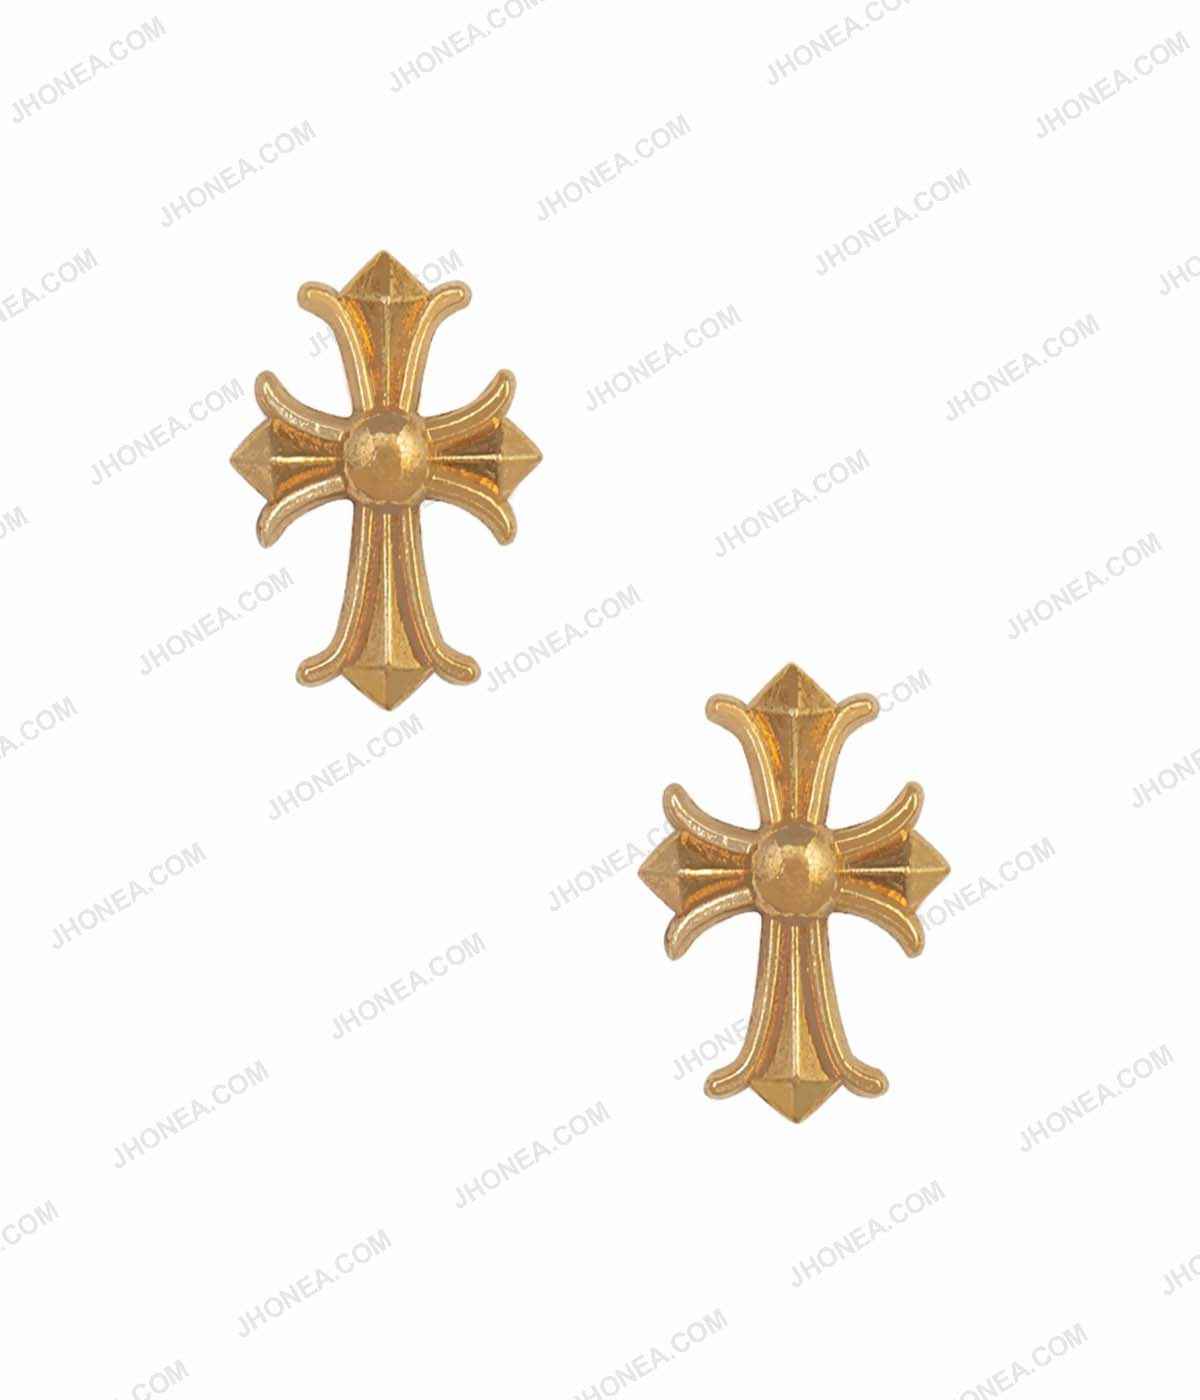 Fashion Golden Collar Tips with Cross Sign Motif For Men